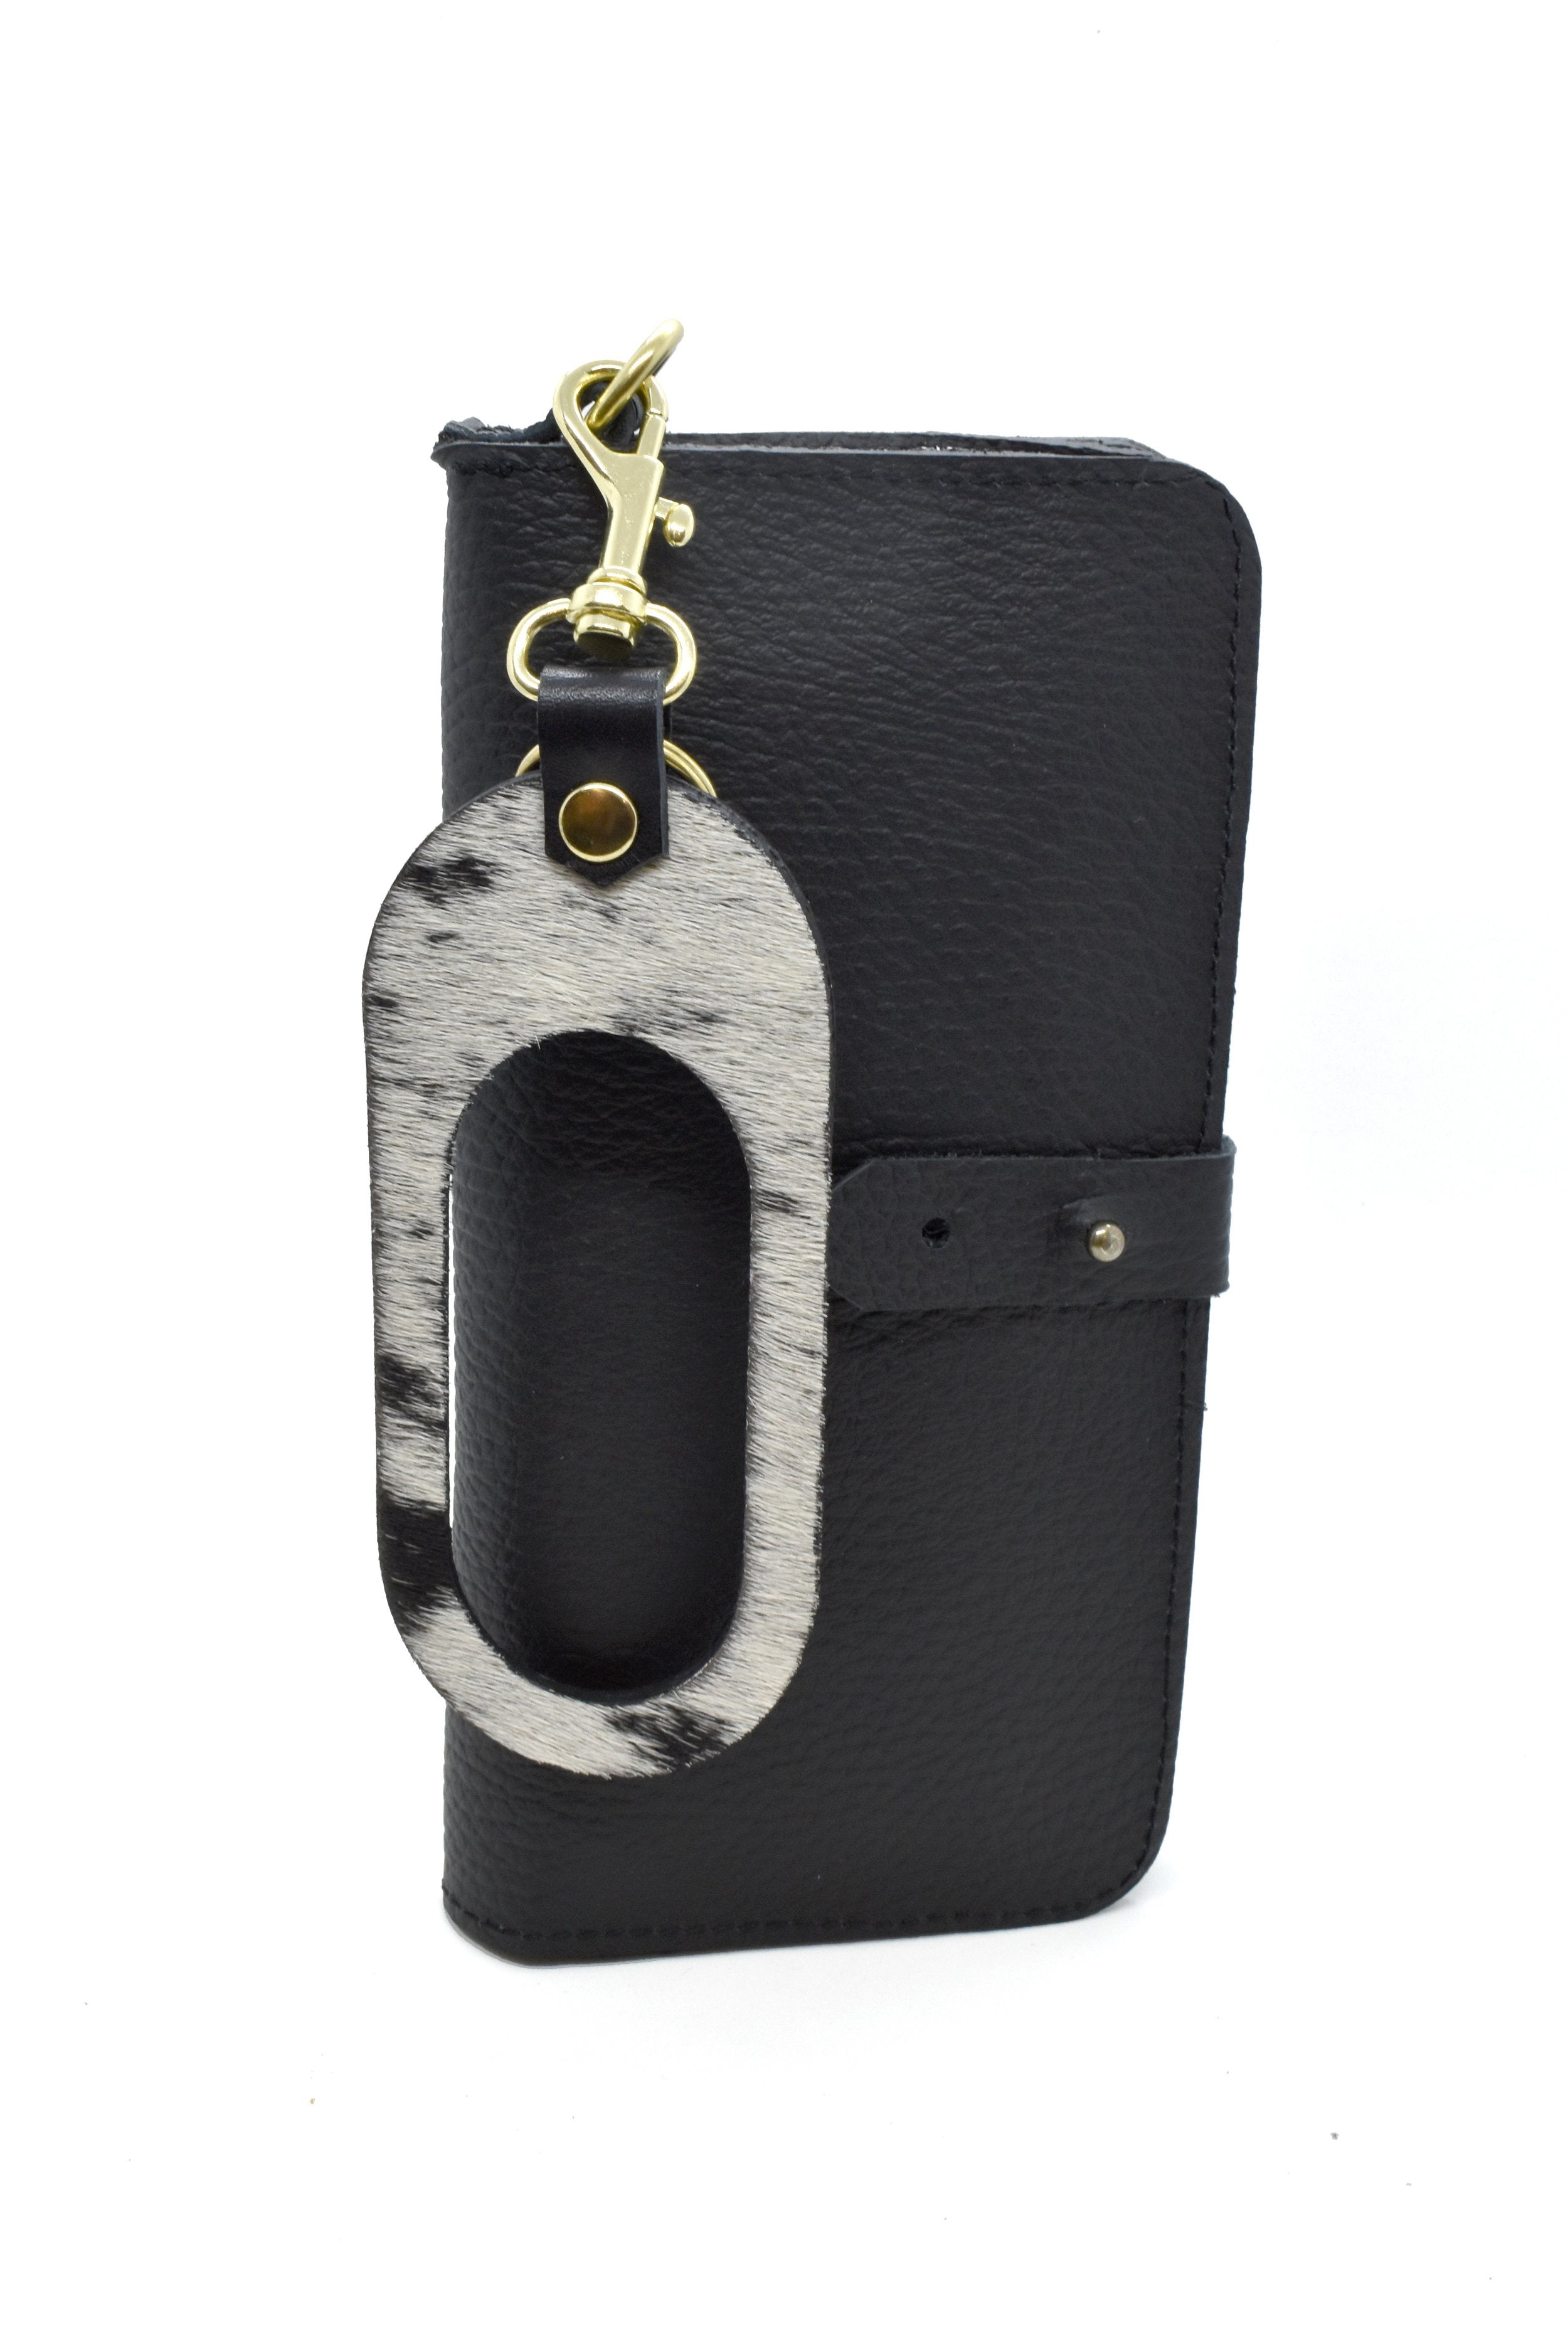 black leather catch all wallet with western cutout keychain